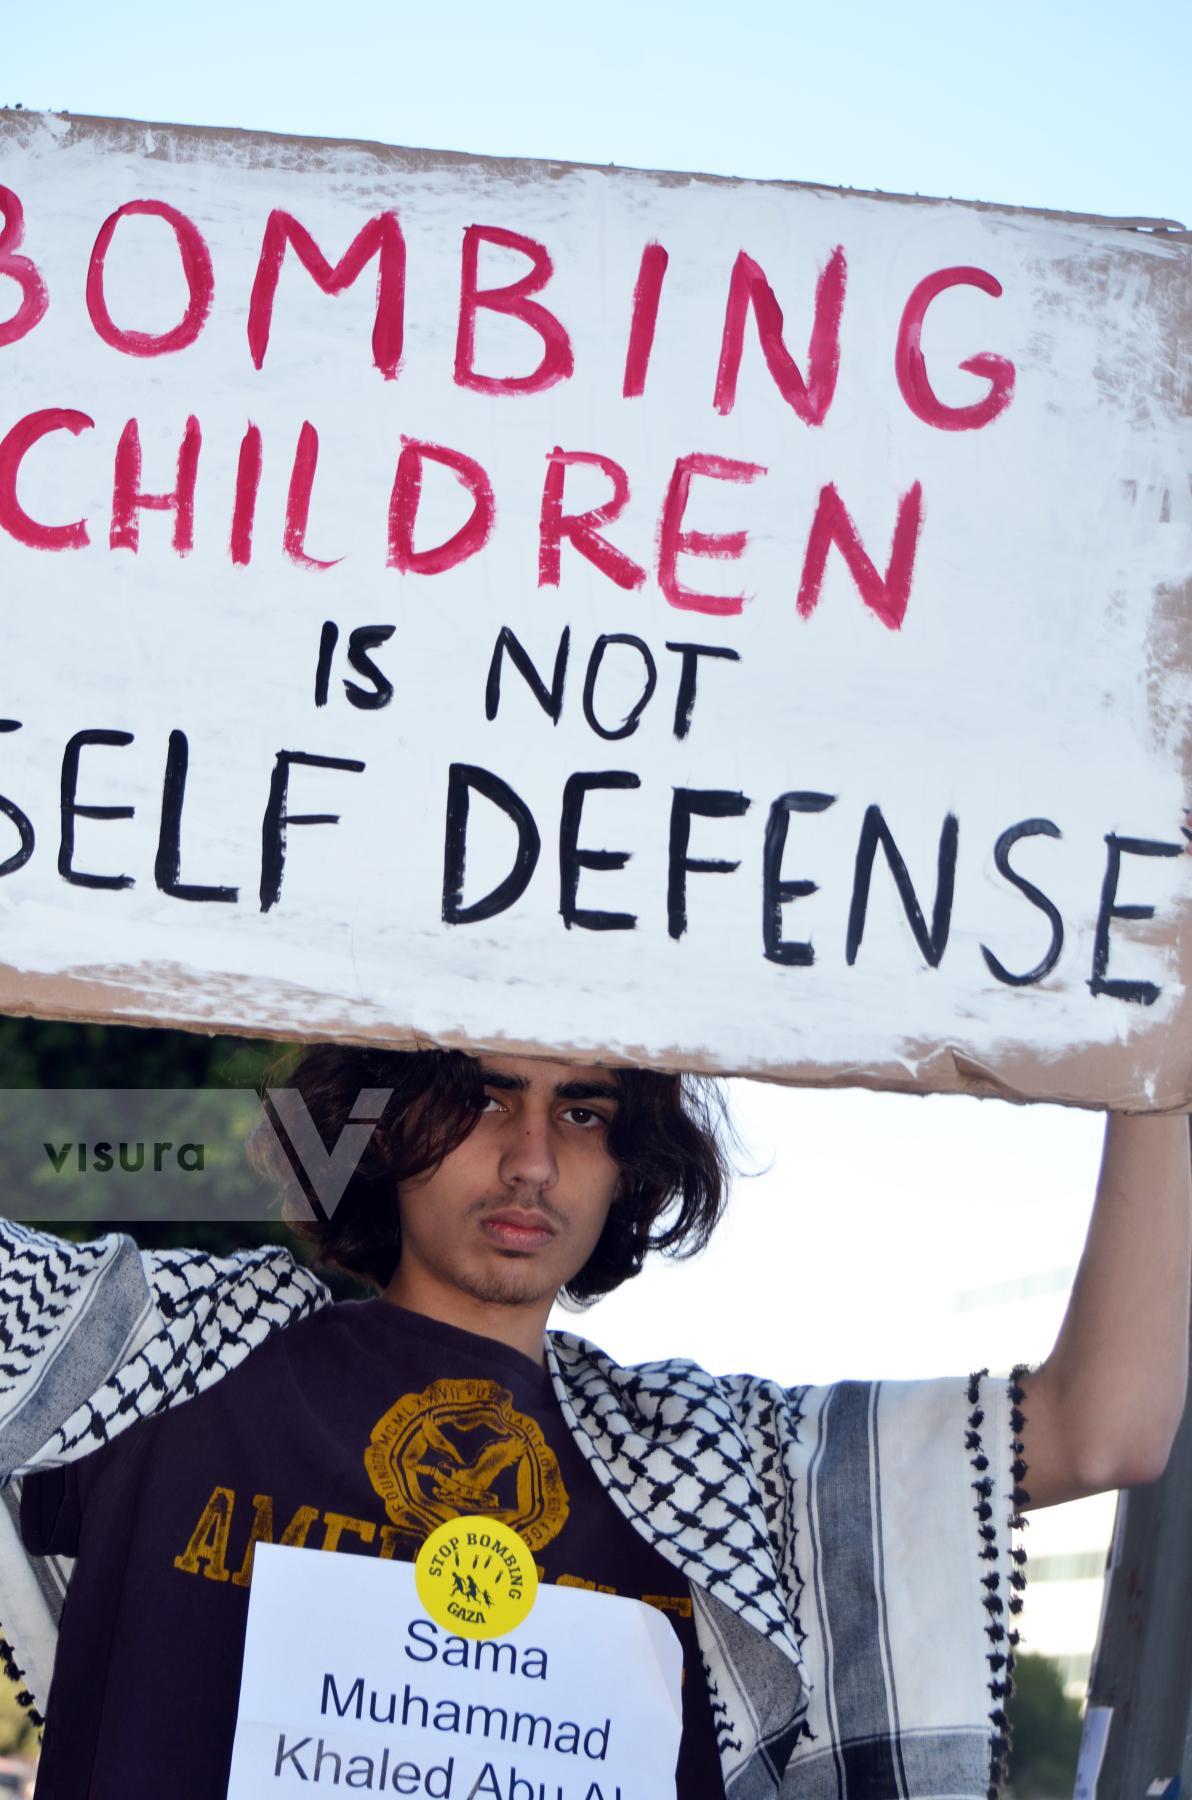 Purchase Bombing Children Is Not Self Defense by Tish Lampert